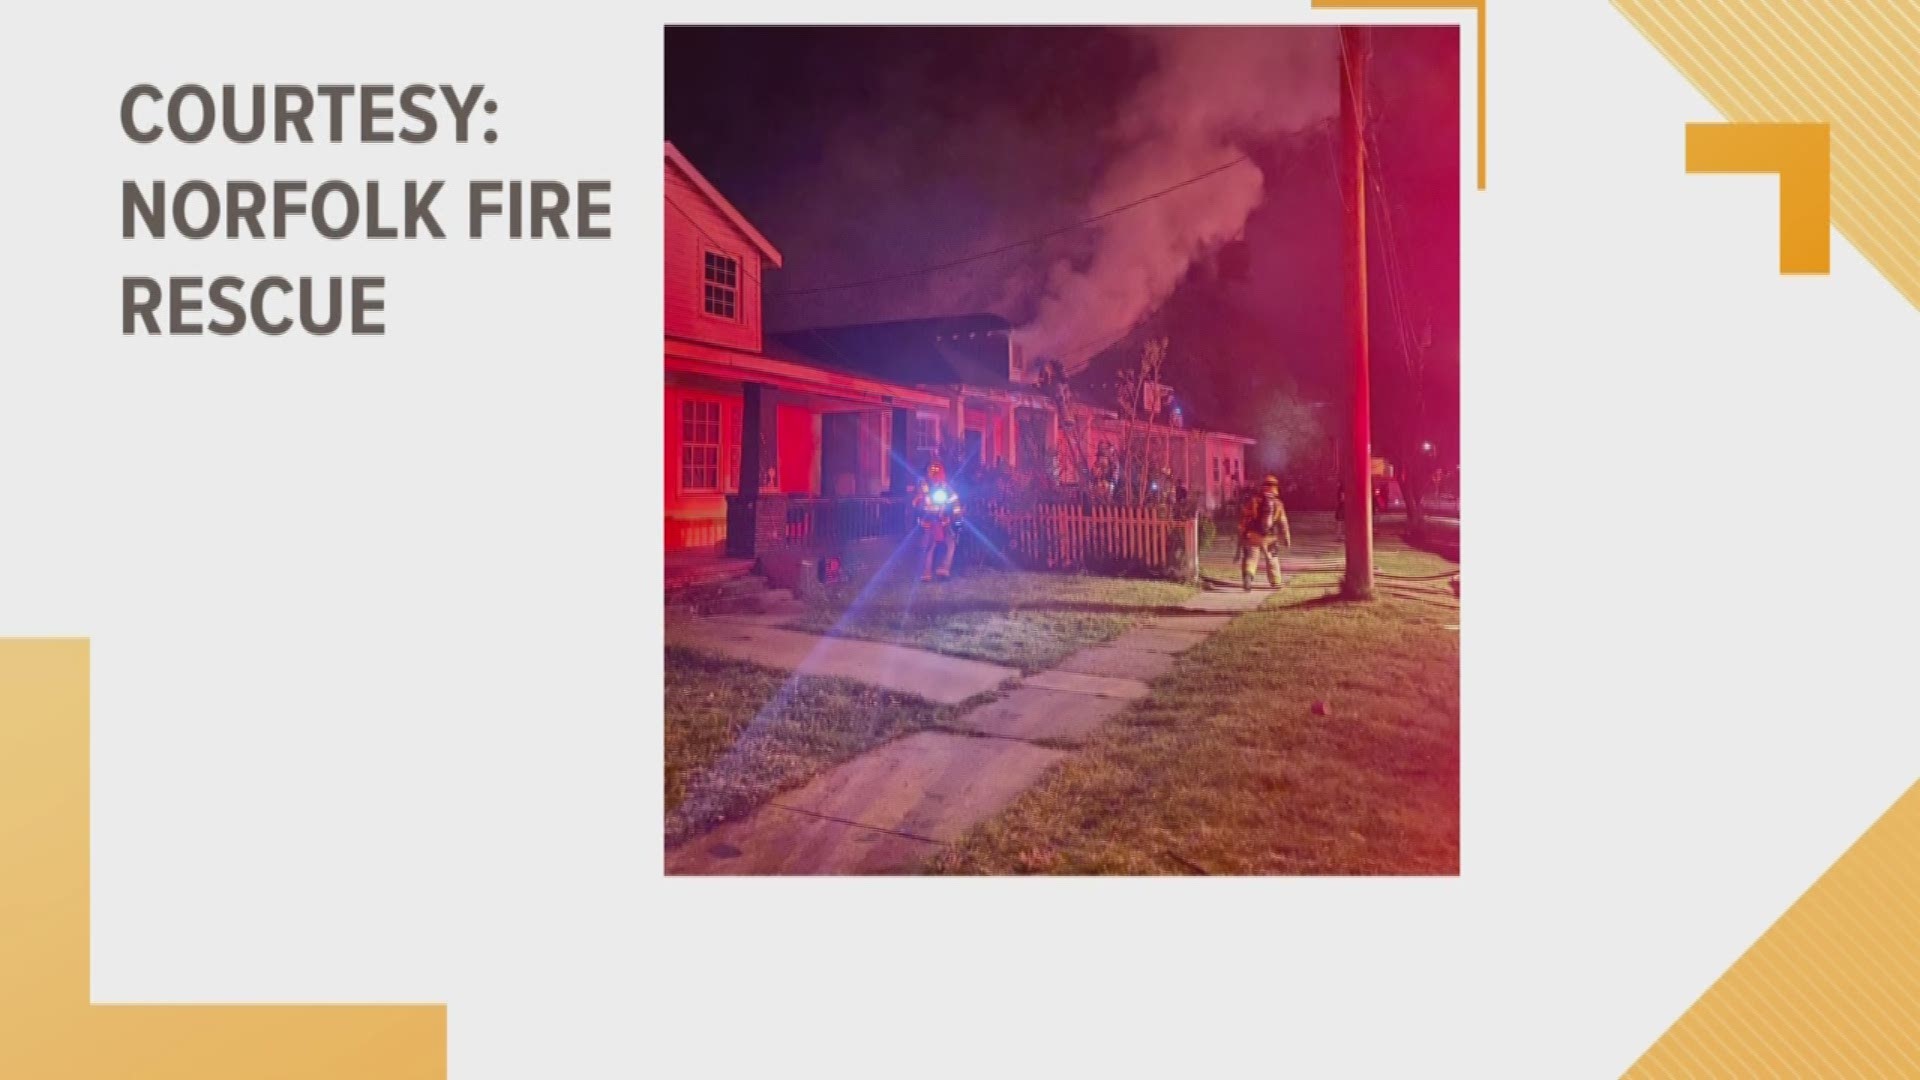 The fire occurred in the 3100 block of Argonne Avenue.